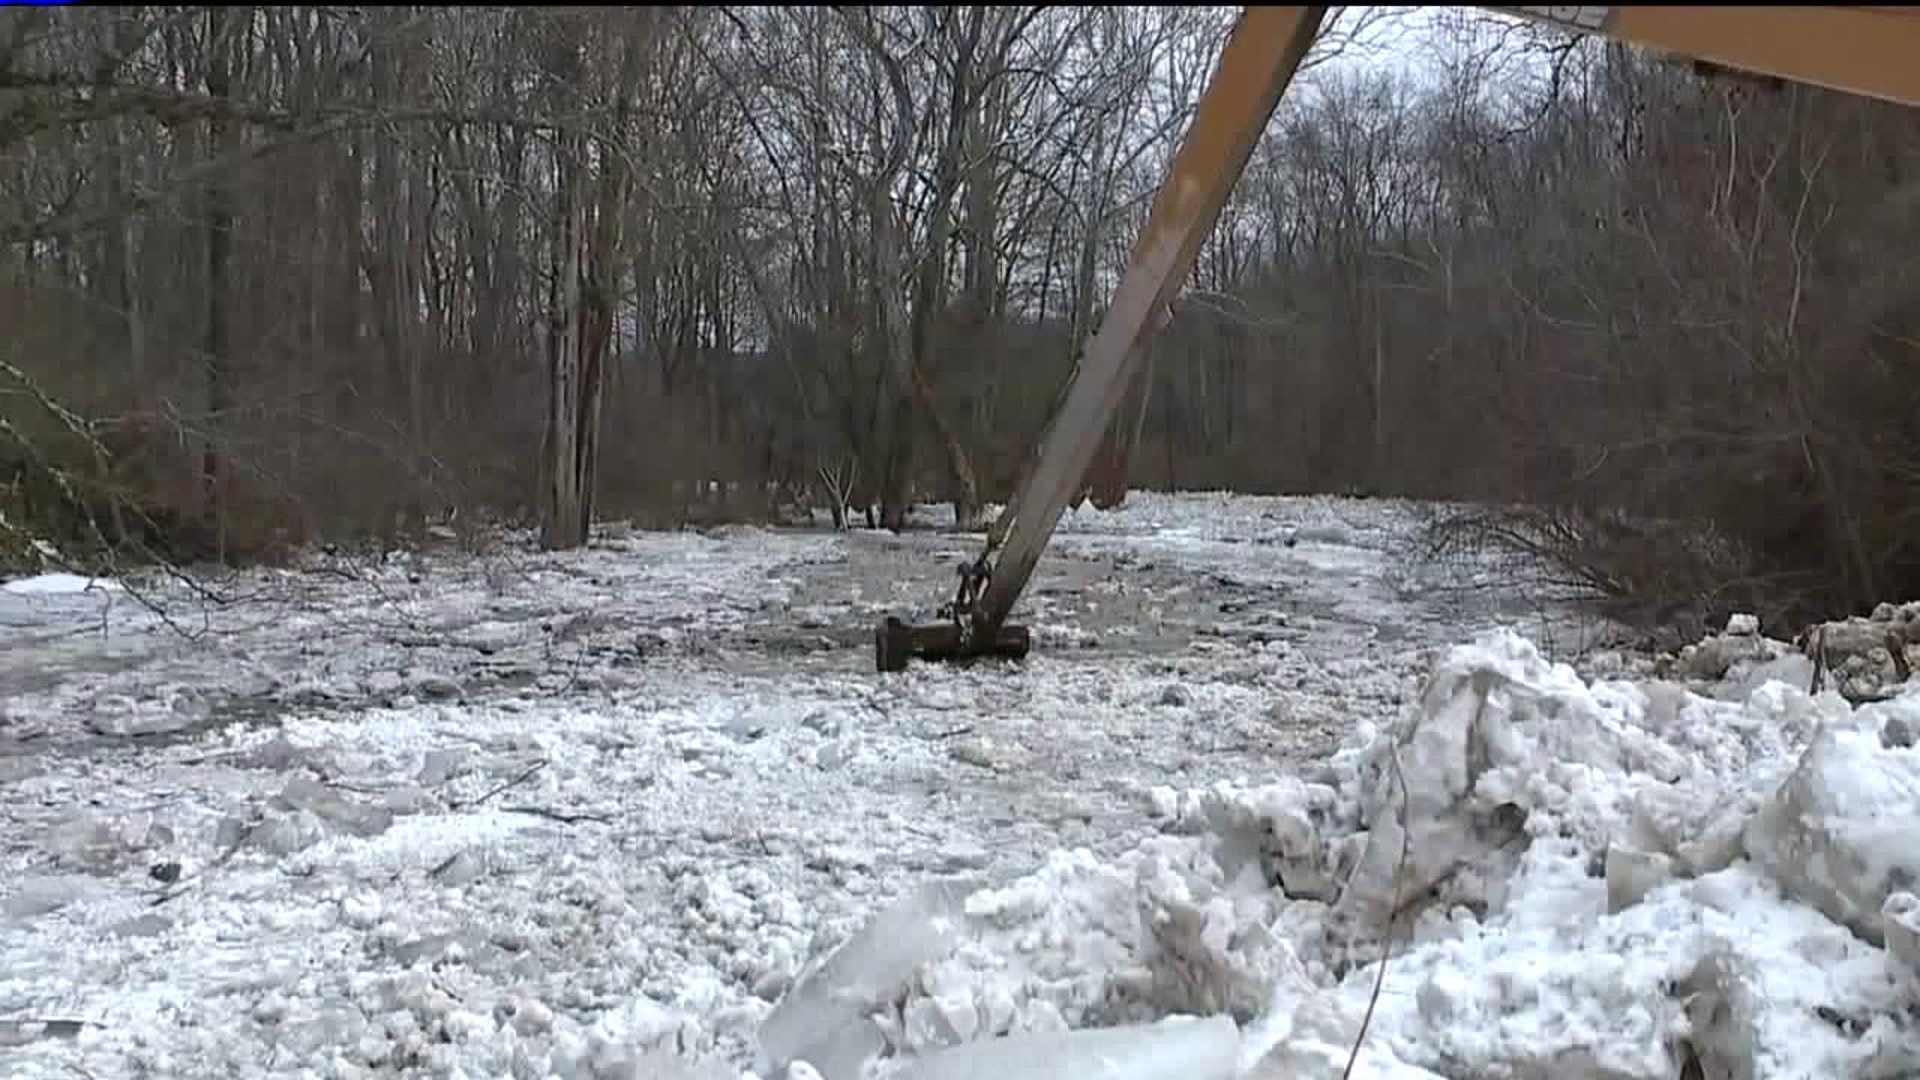 Work to Clear Ice Jams Continues in Nicholson